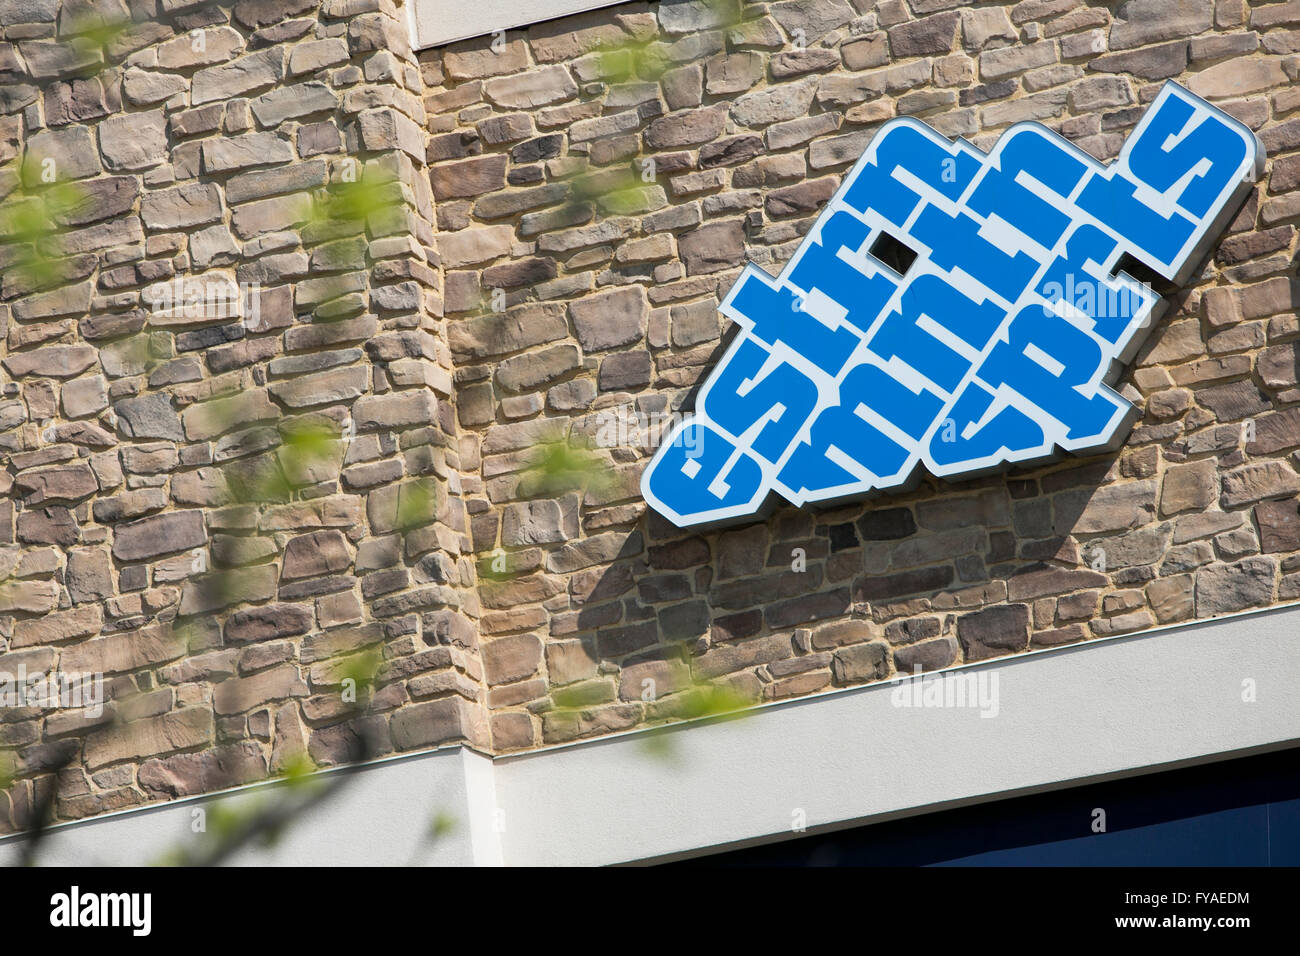 A logo sign outside of an Eastern Mountain Sports retail store in Dulles, Virginia on April 16, 2016. Stock Photo